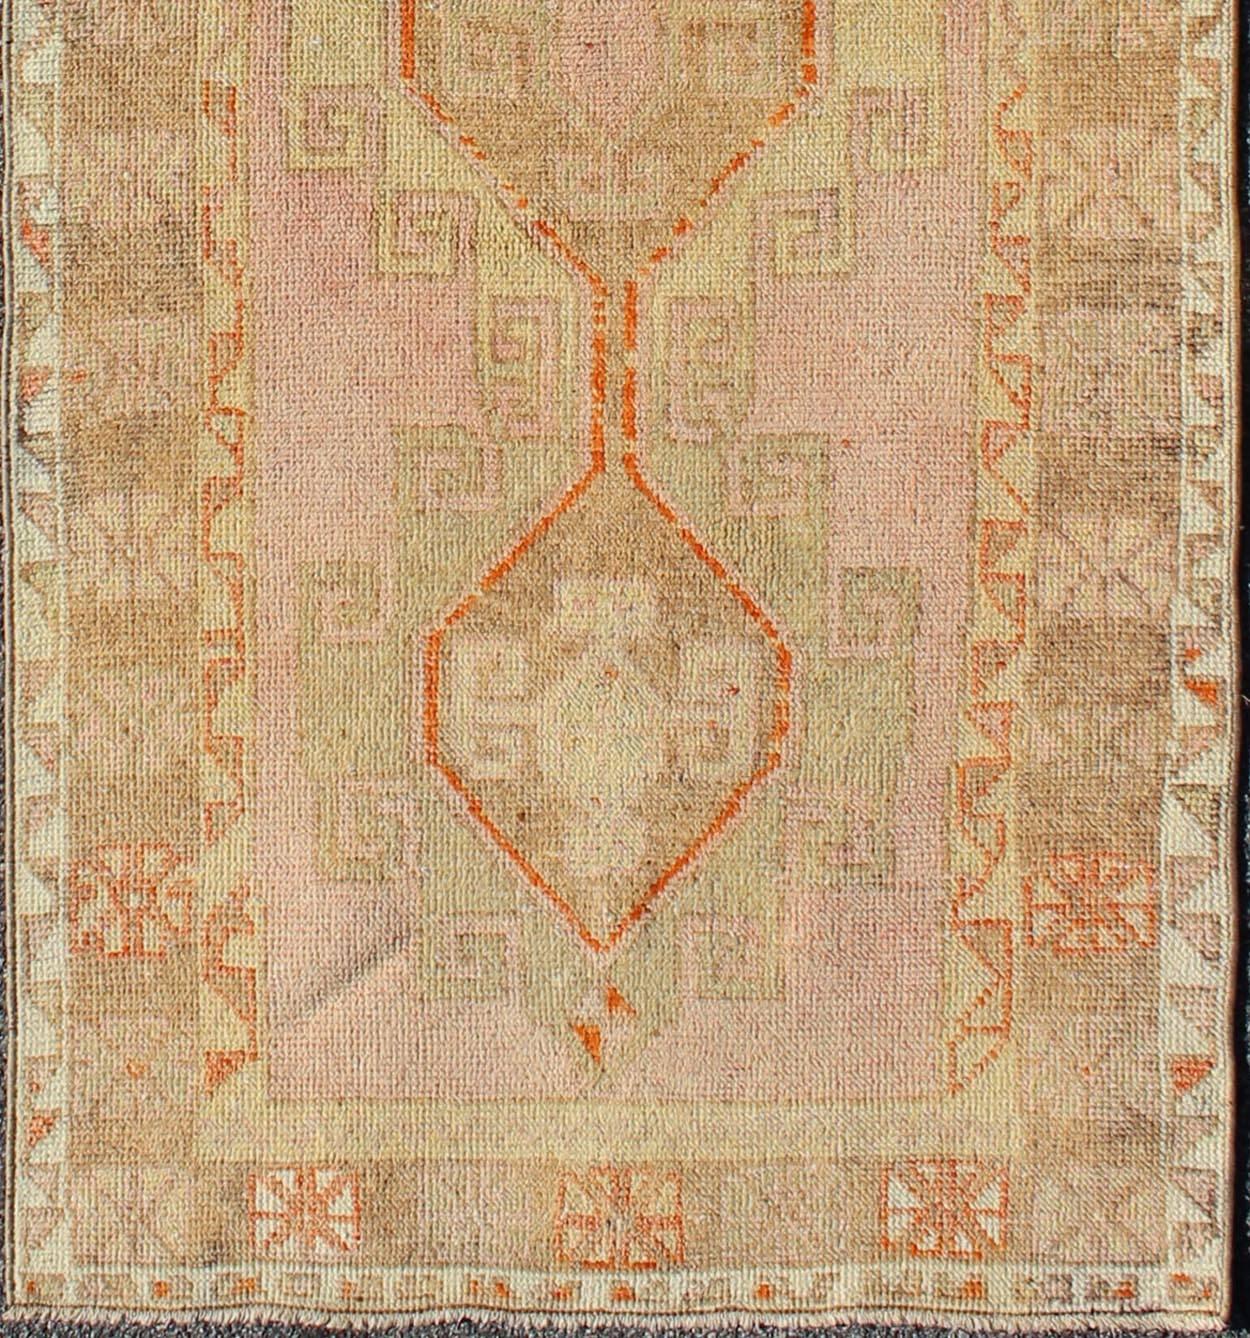 Measures: 3'2 x 9'1.
Handwoven in Turkey, this unique Oushak runner features four medallions surrounded by Greek key motif. Unique in coloration, this gorgeous runner features colors such as coral, pink, orange, light green, camel and taupe.